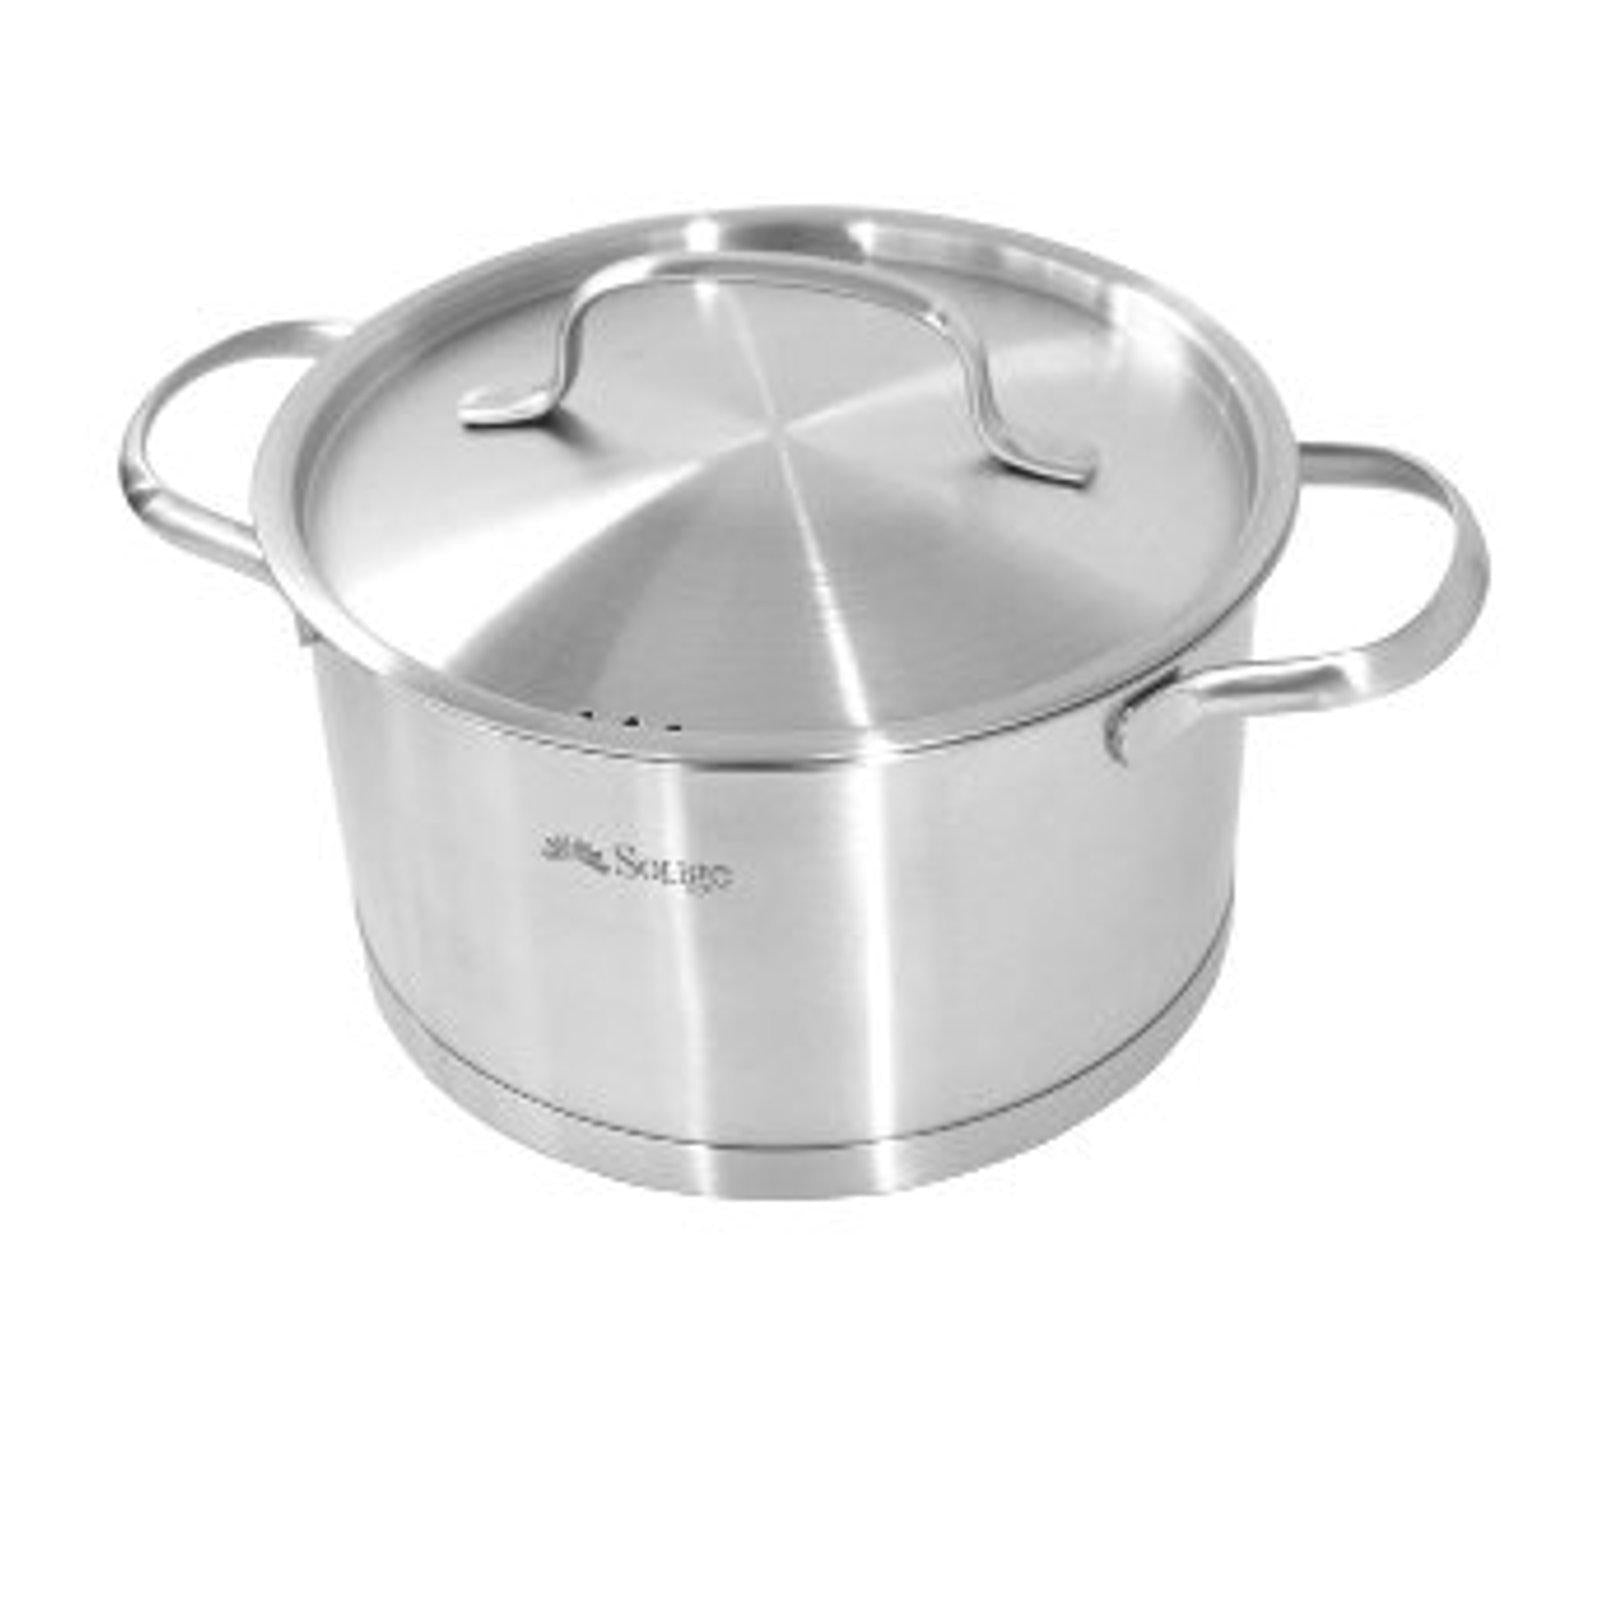 24 cm Induction Casserole Pot With Lid - Stainless Steel-Stainless Steel Cookware-Chef's Quality Cookware